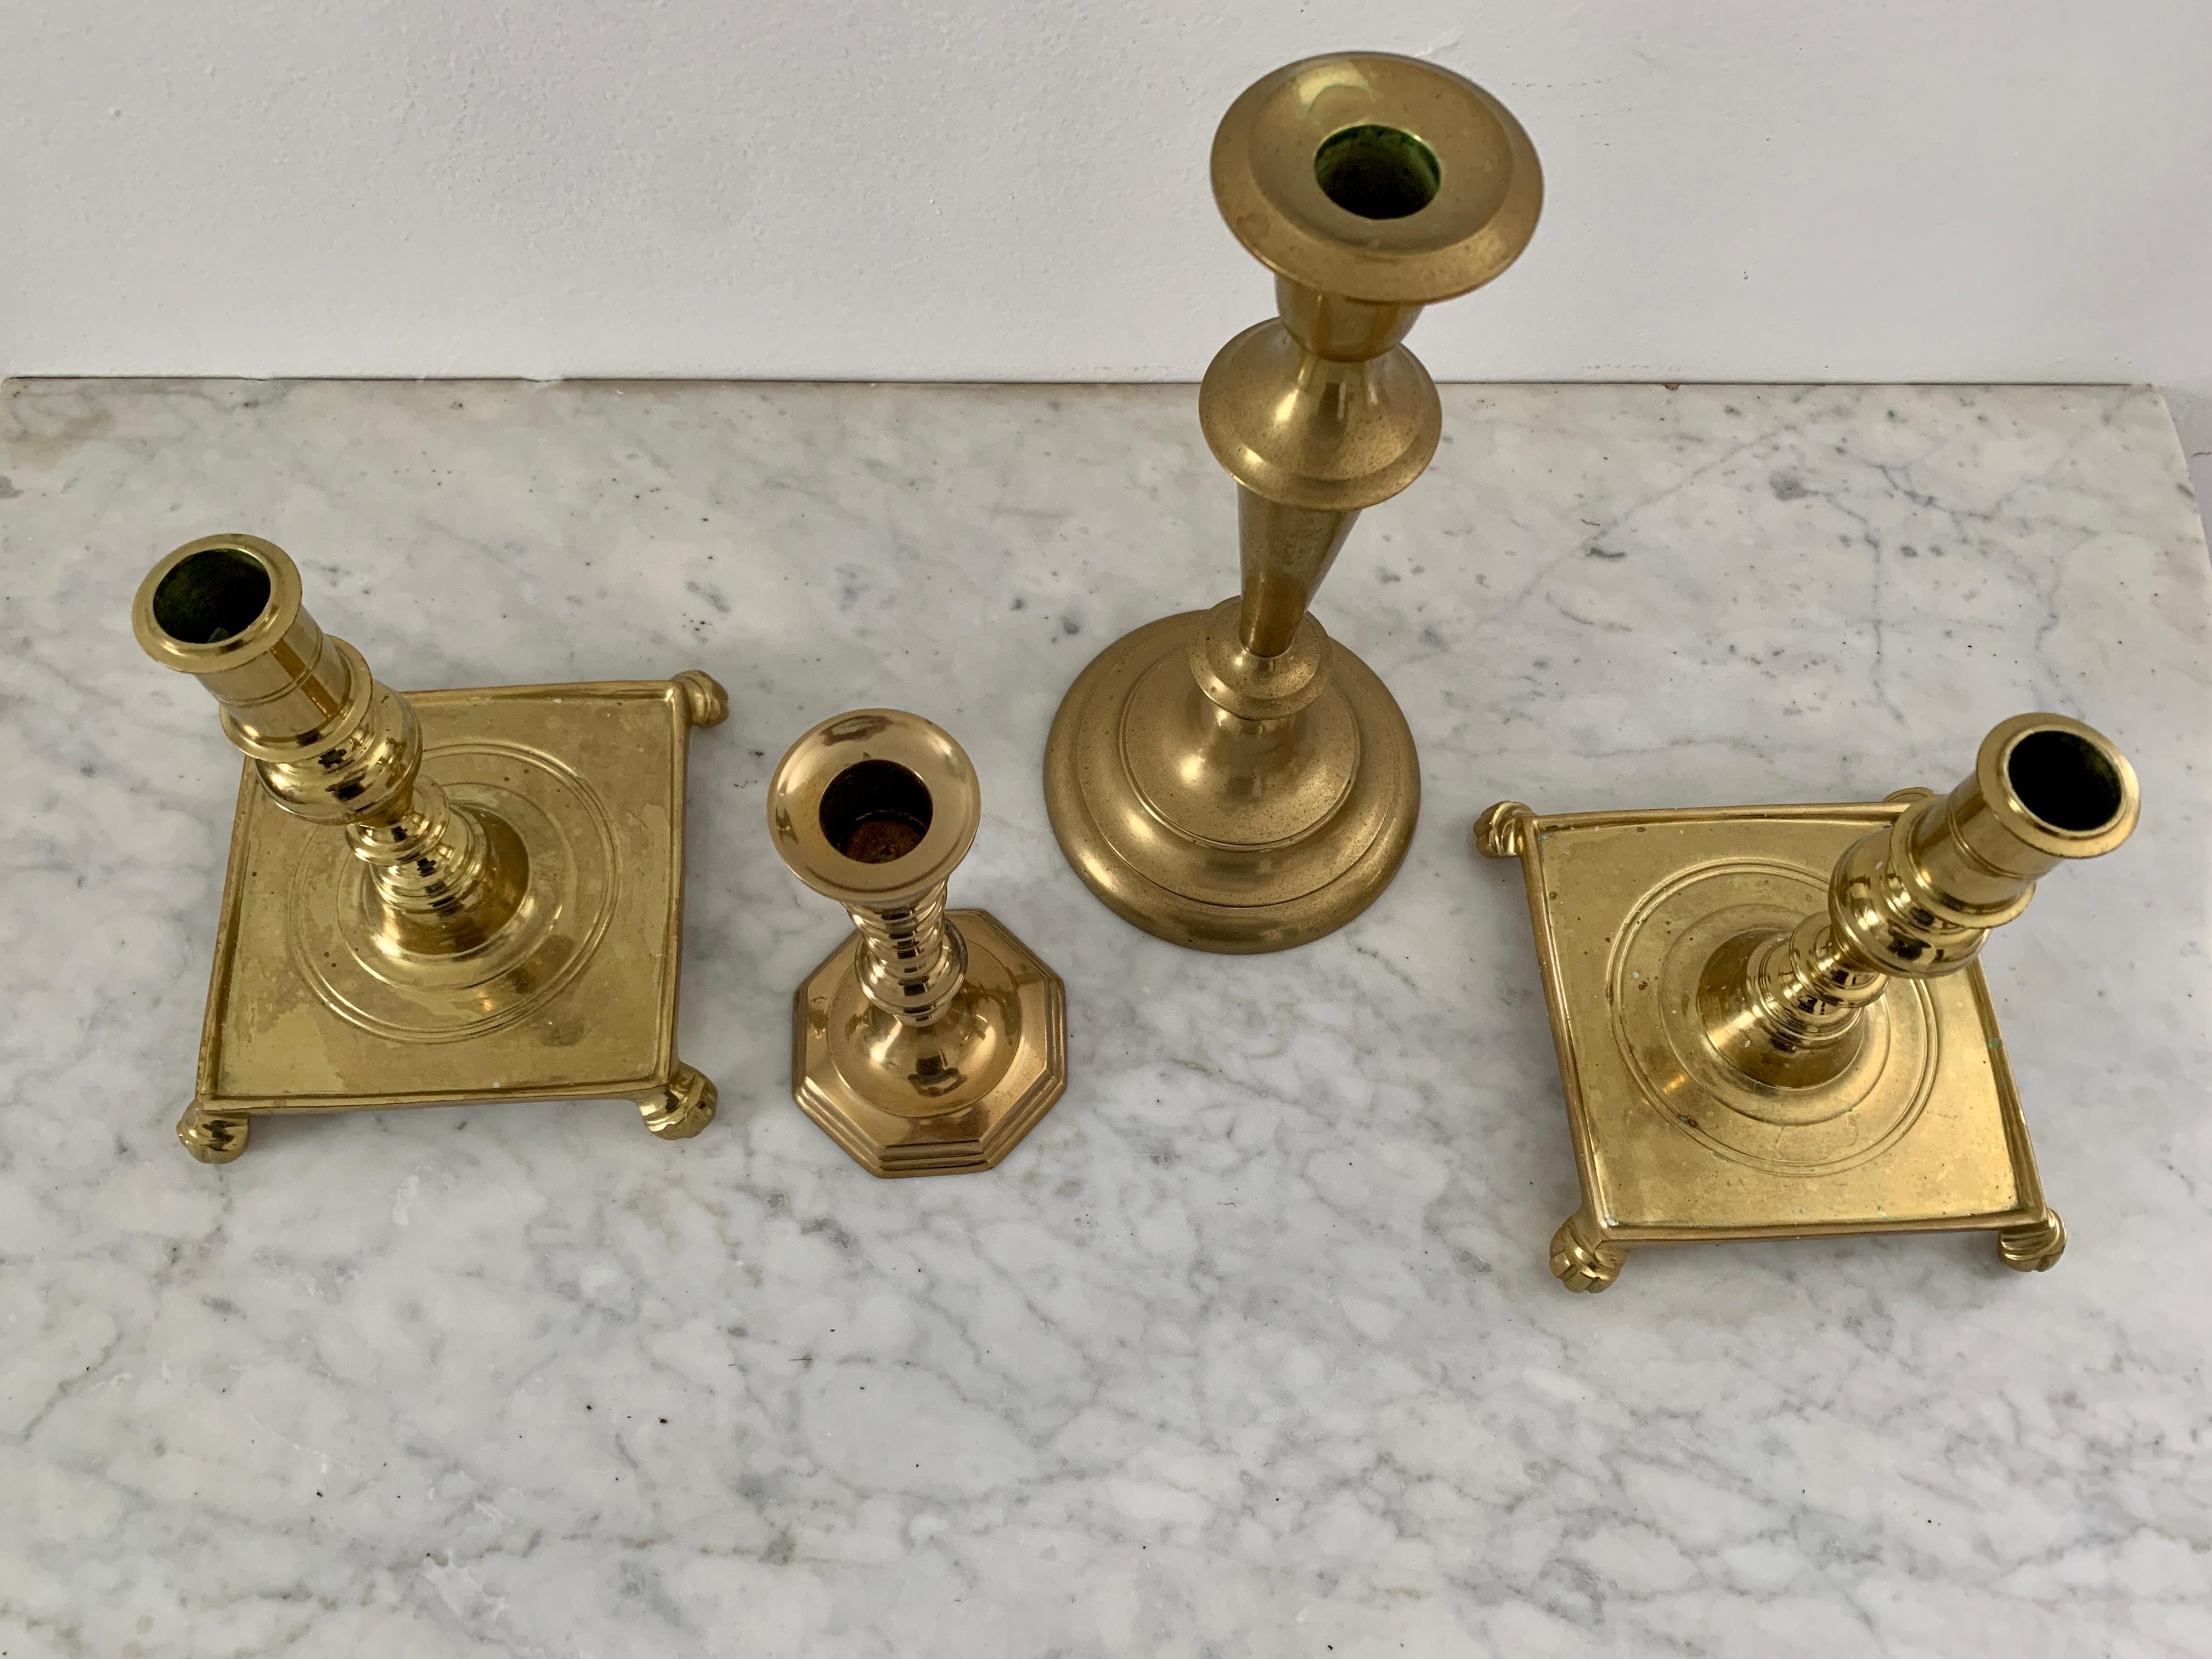 A beautiful set of four brass candlestick holders

Mid-20th Century

Tallest measures: 4.63